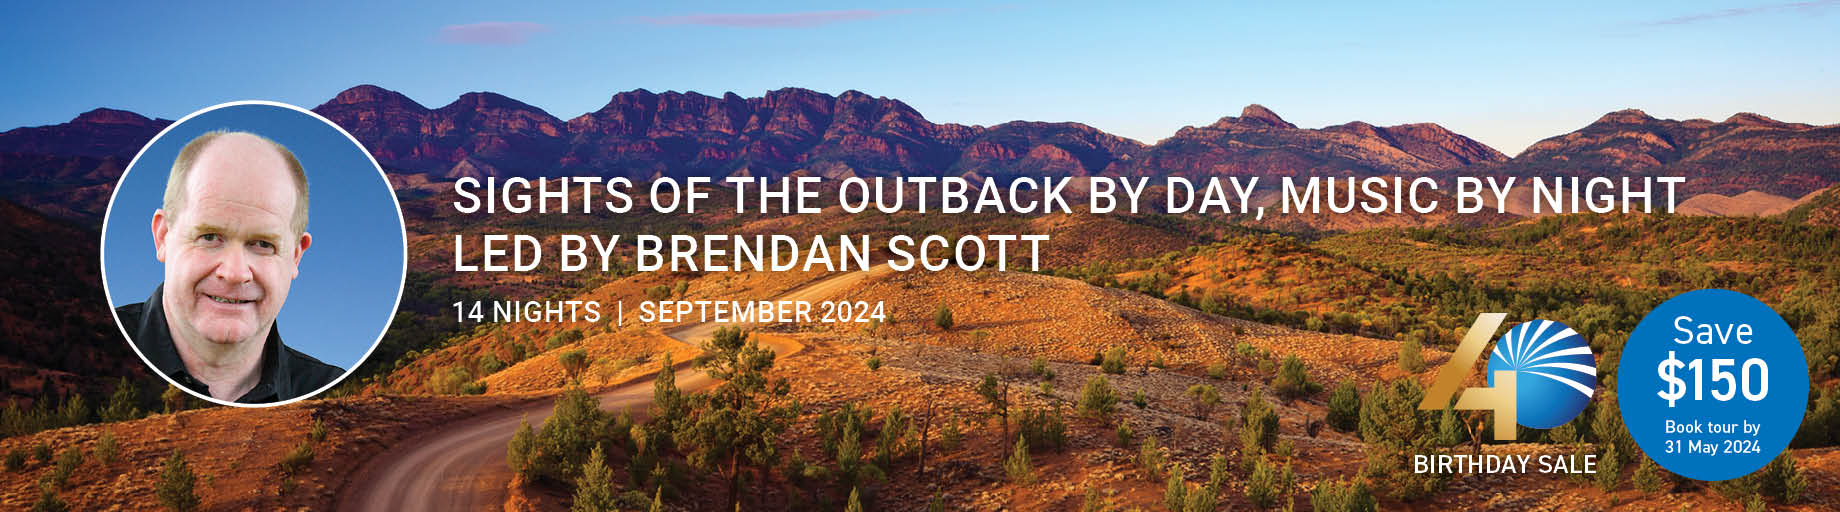 Outback Music Tour with Brendan Scott